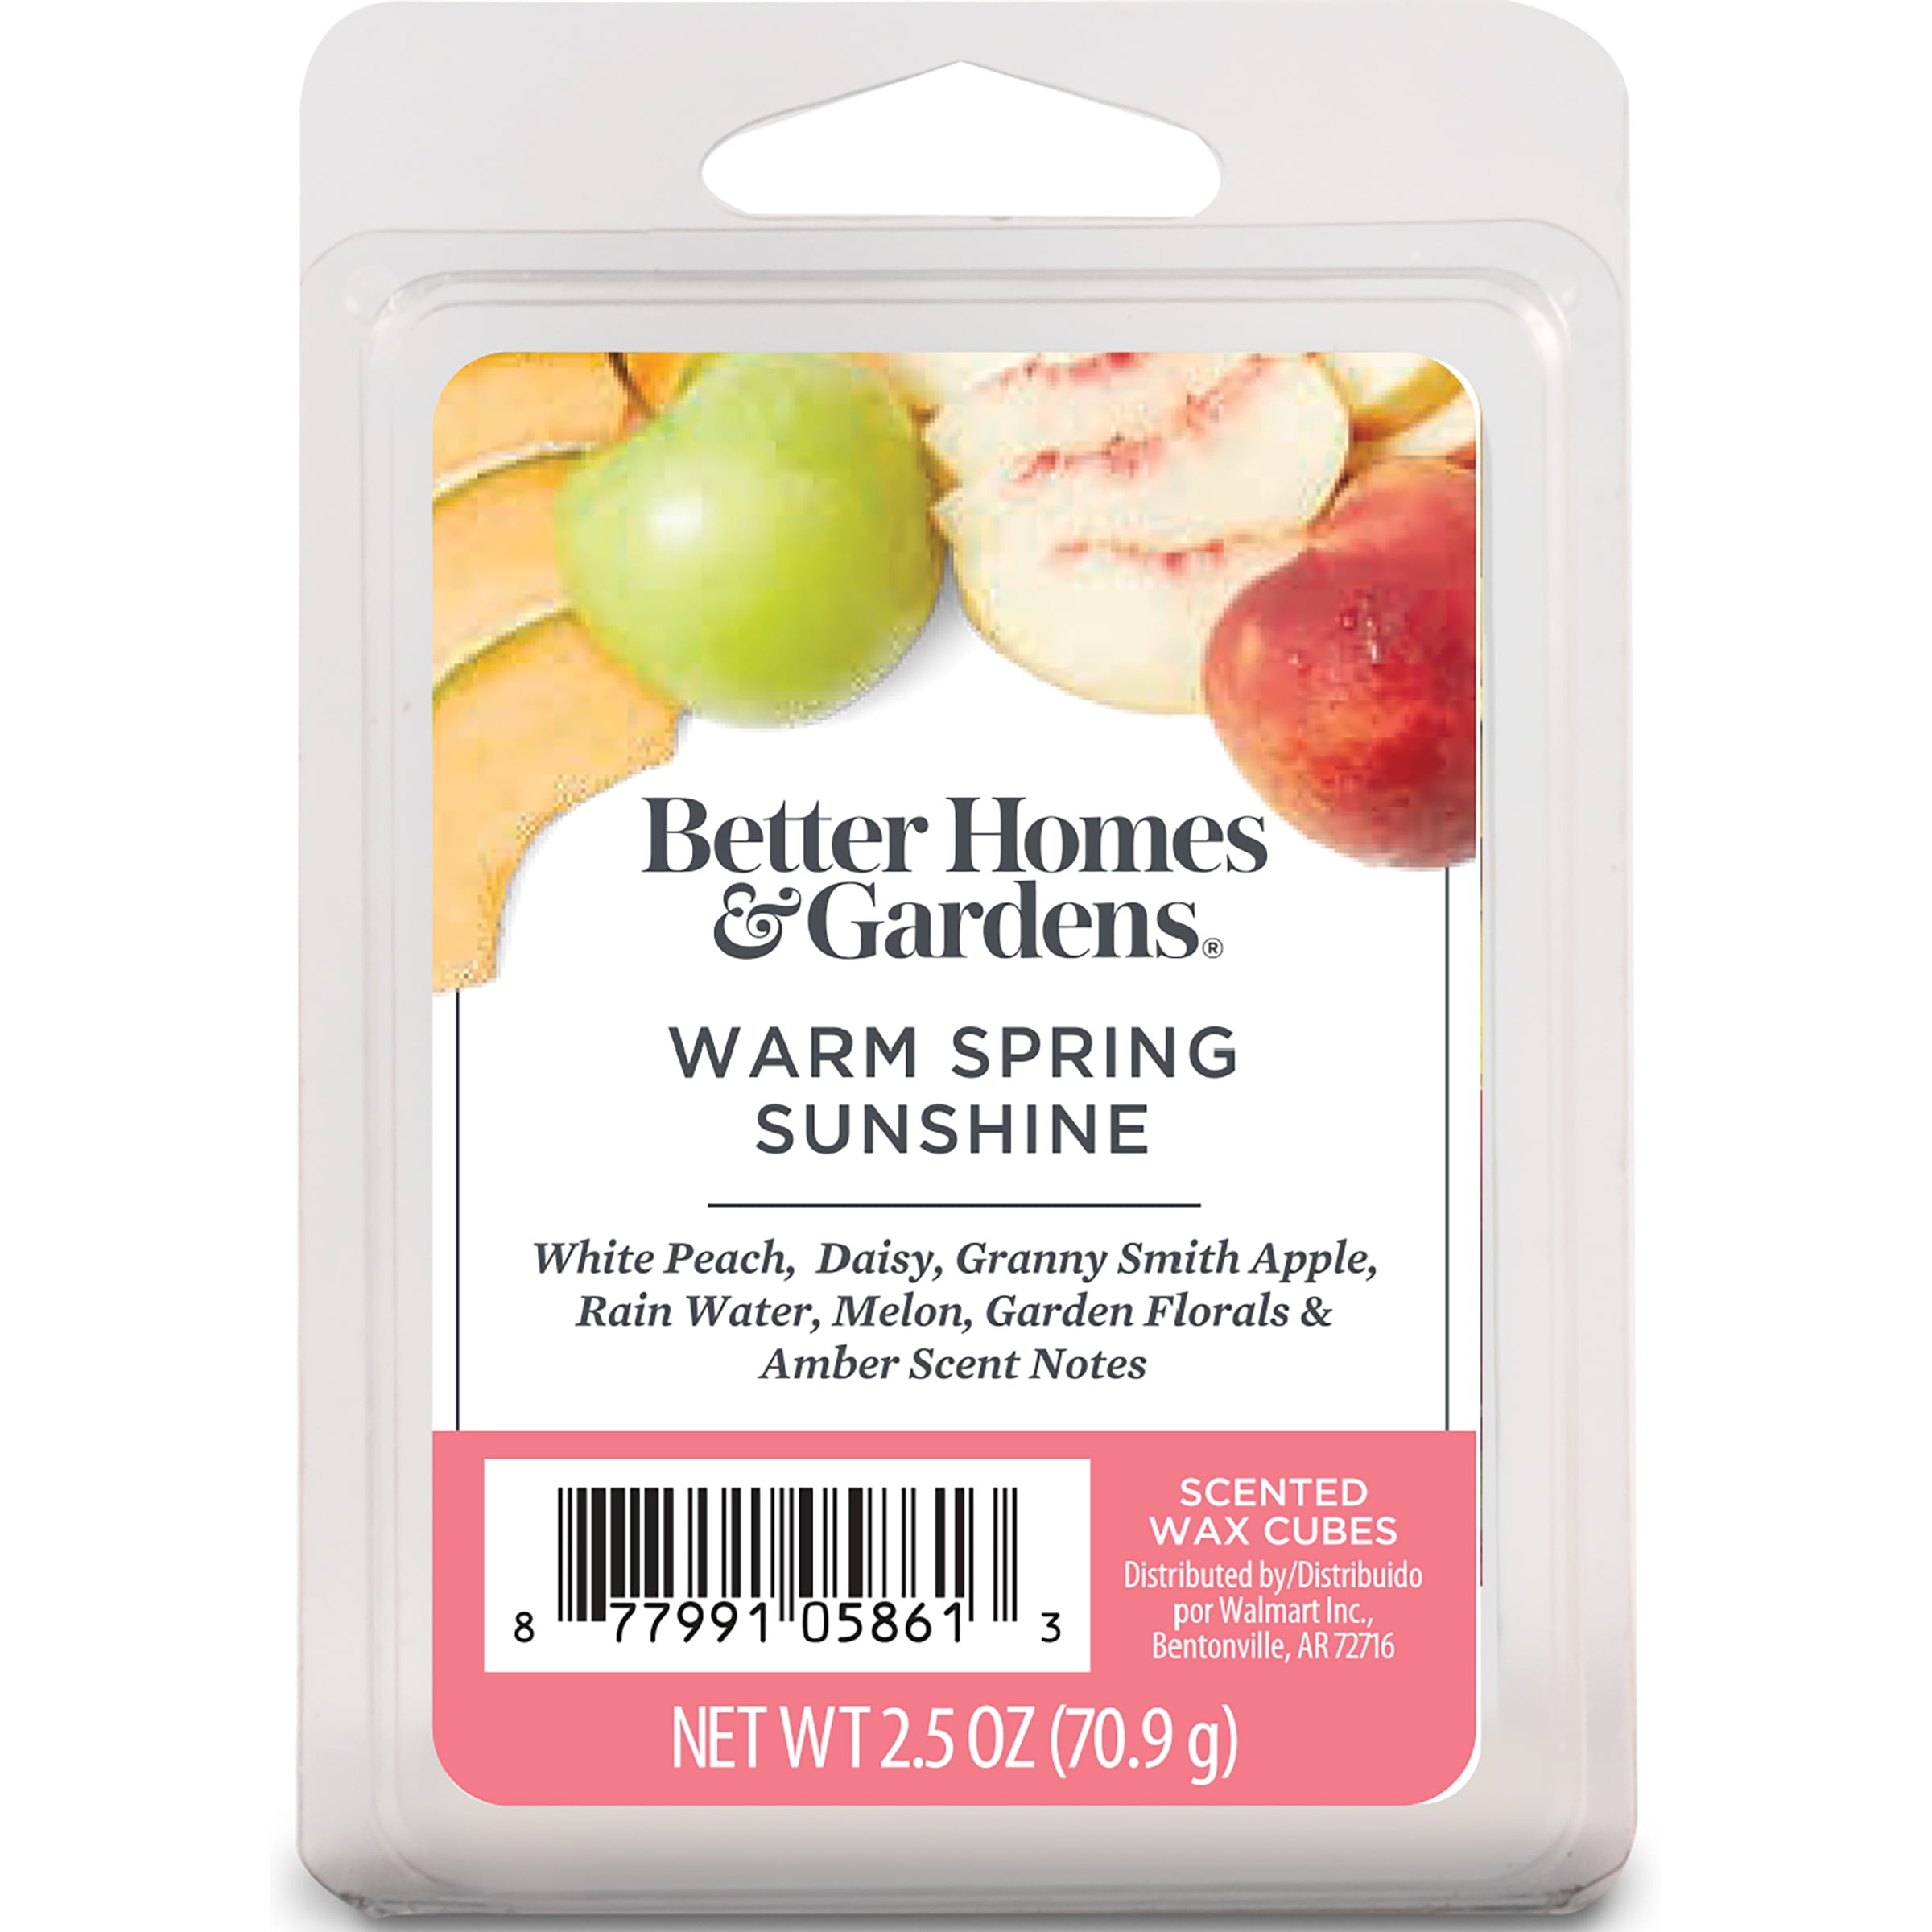 This is a review of Better Homes and Gardens Wax Melts from